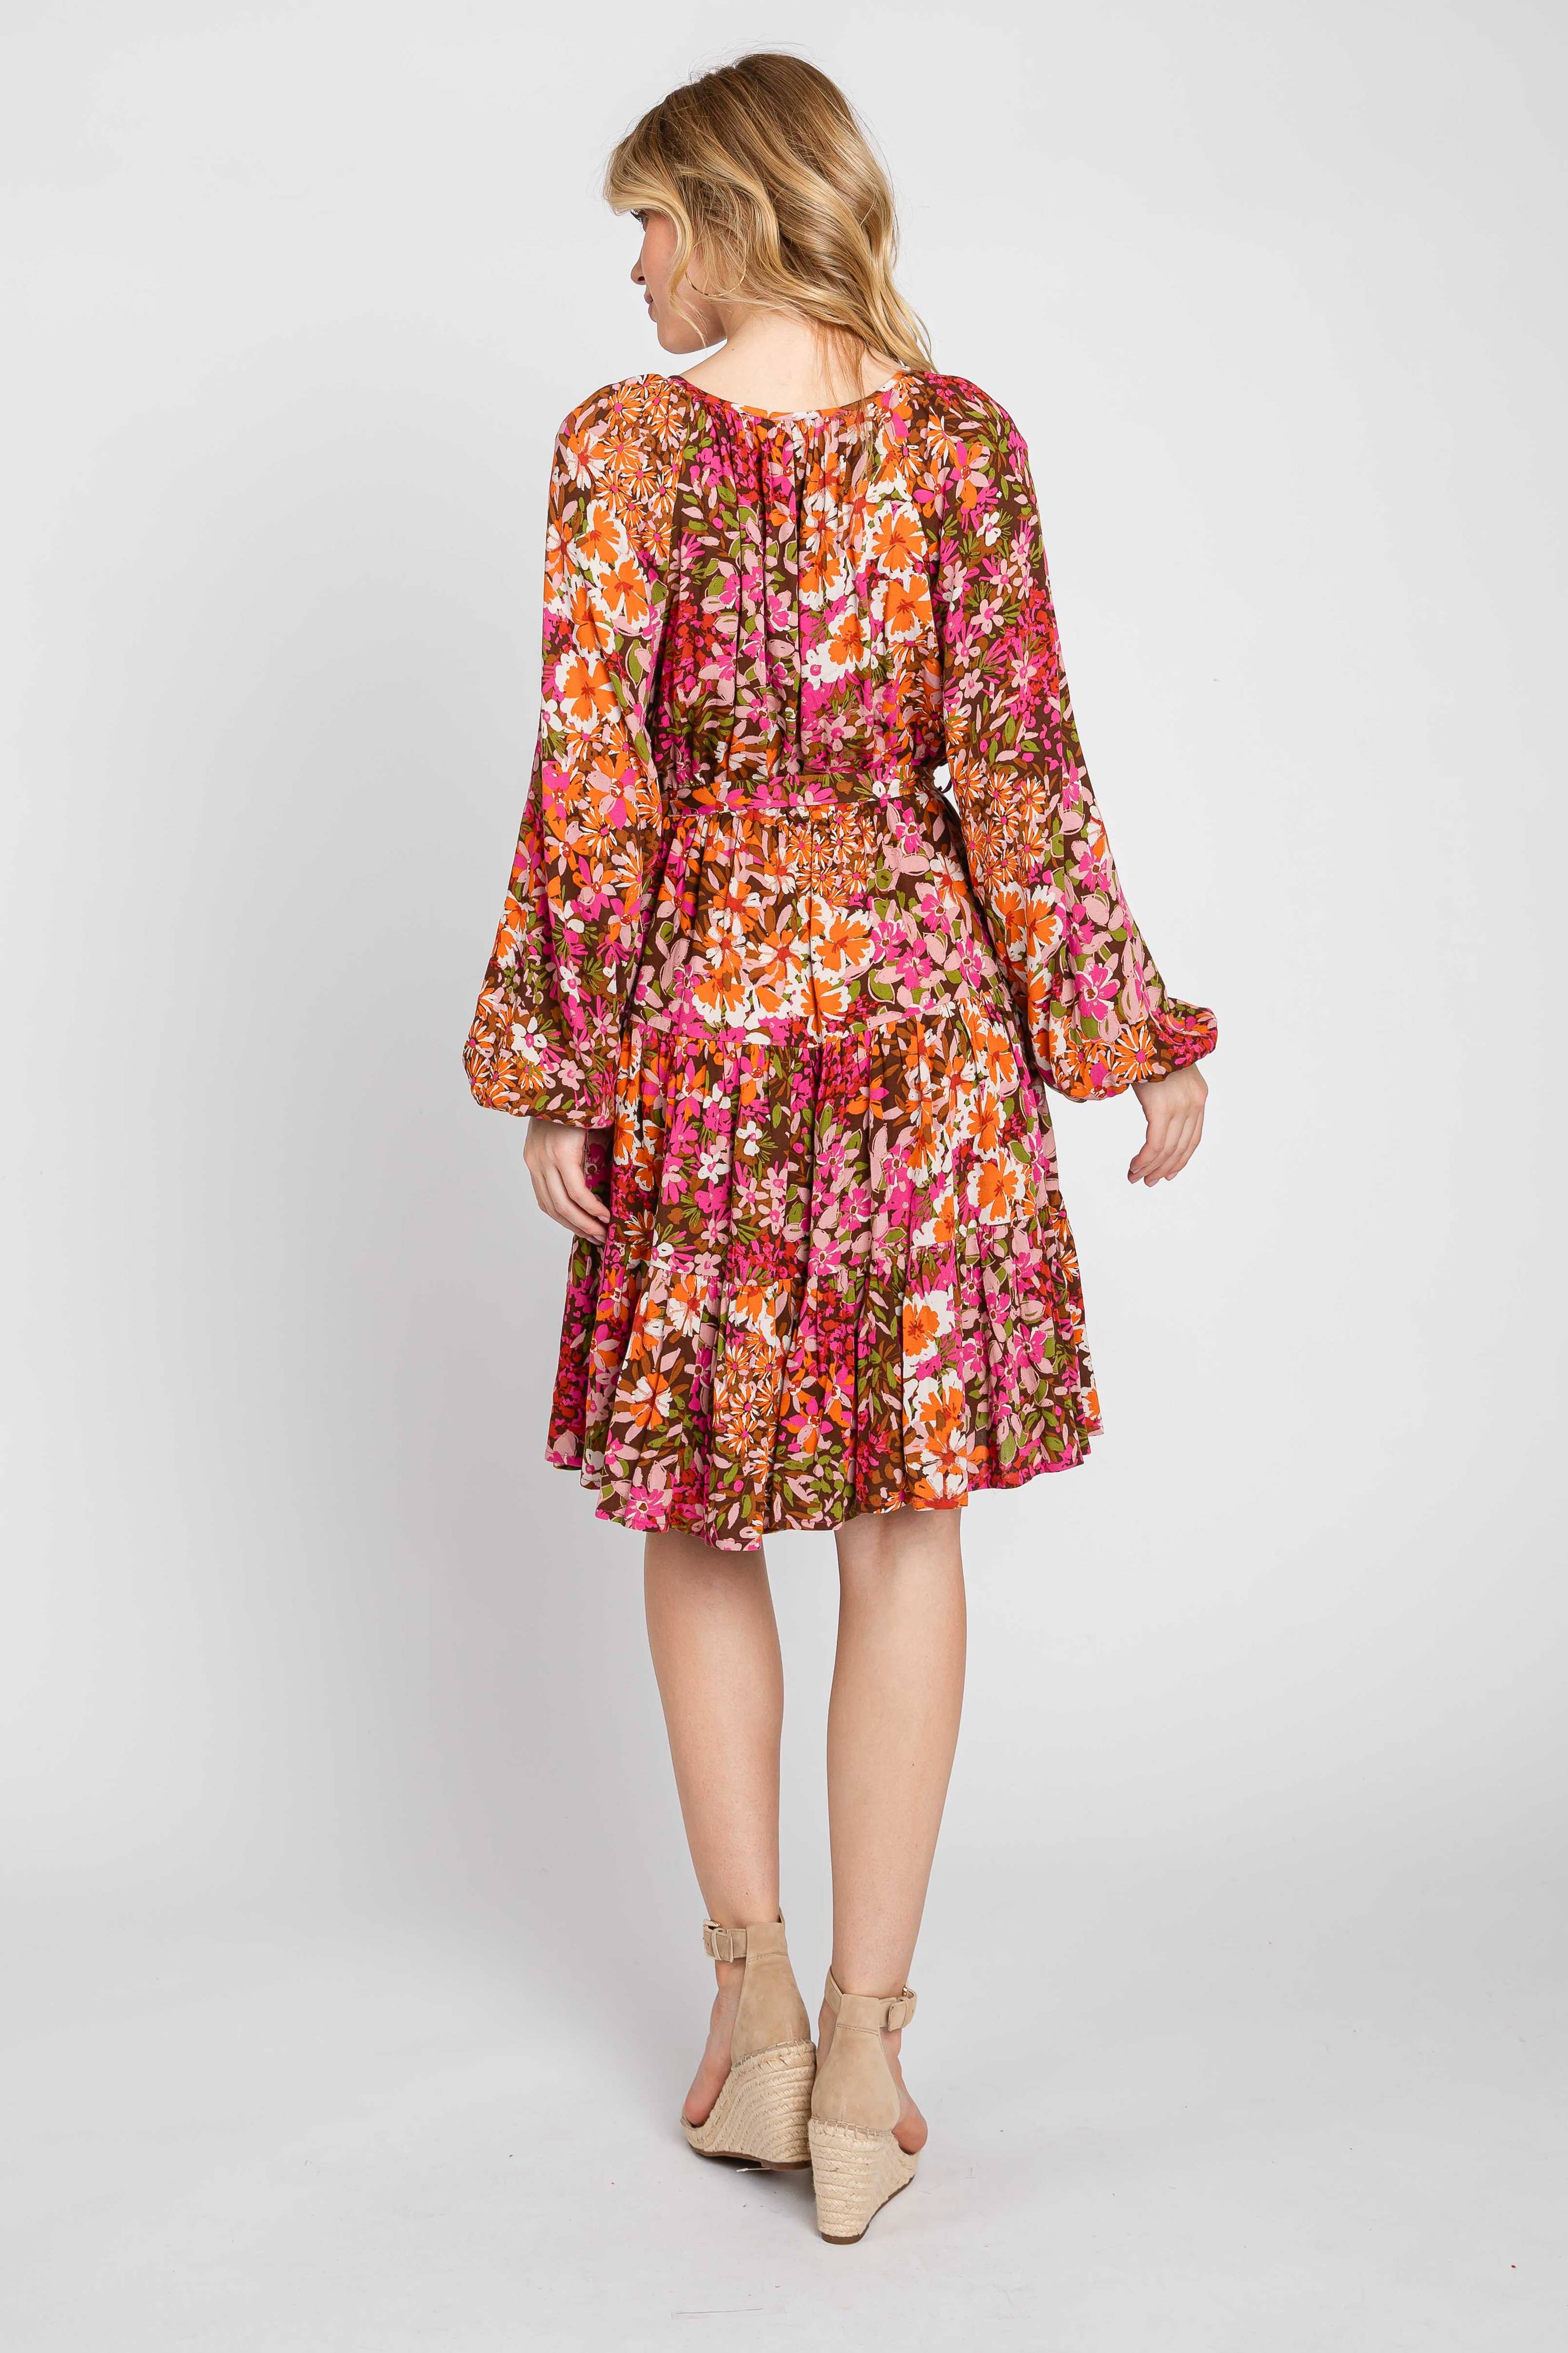 Becca Floral Tiered Dressd